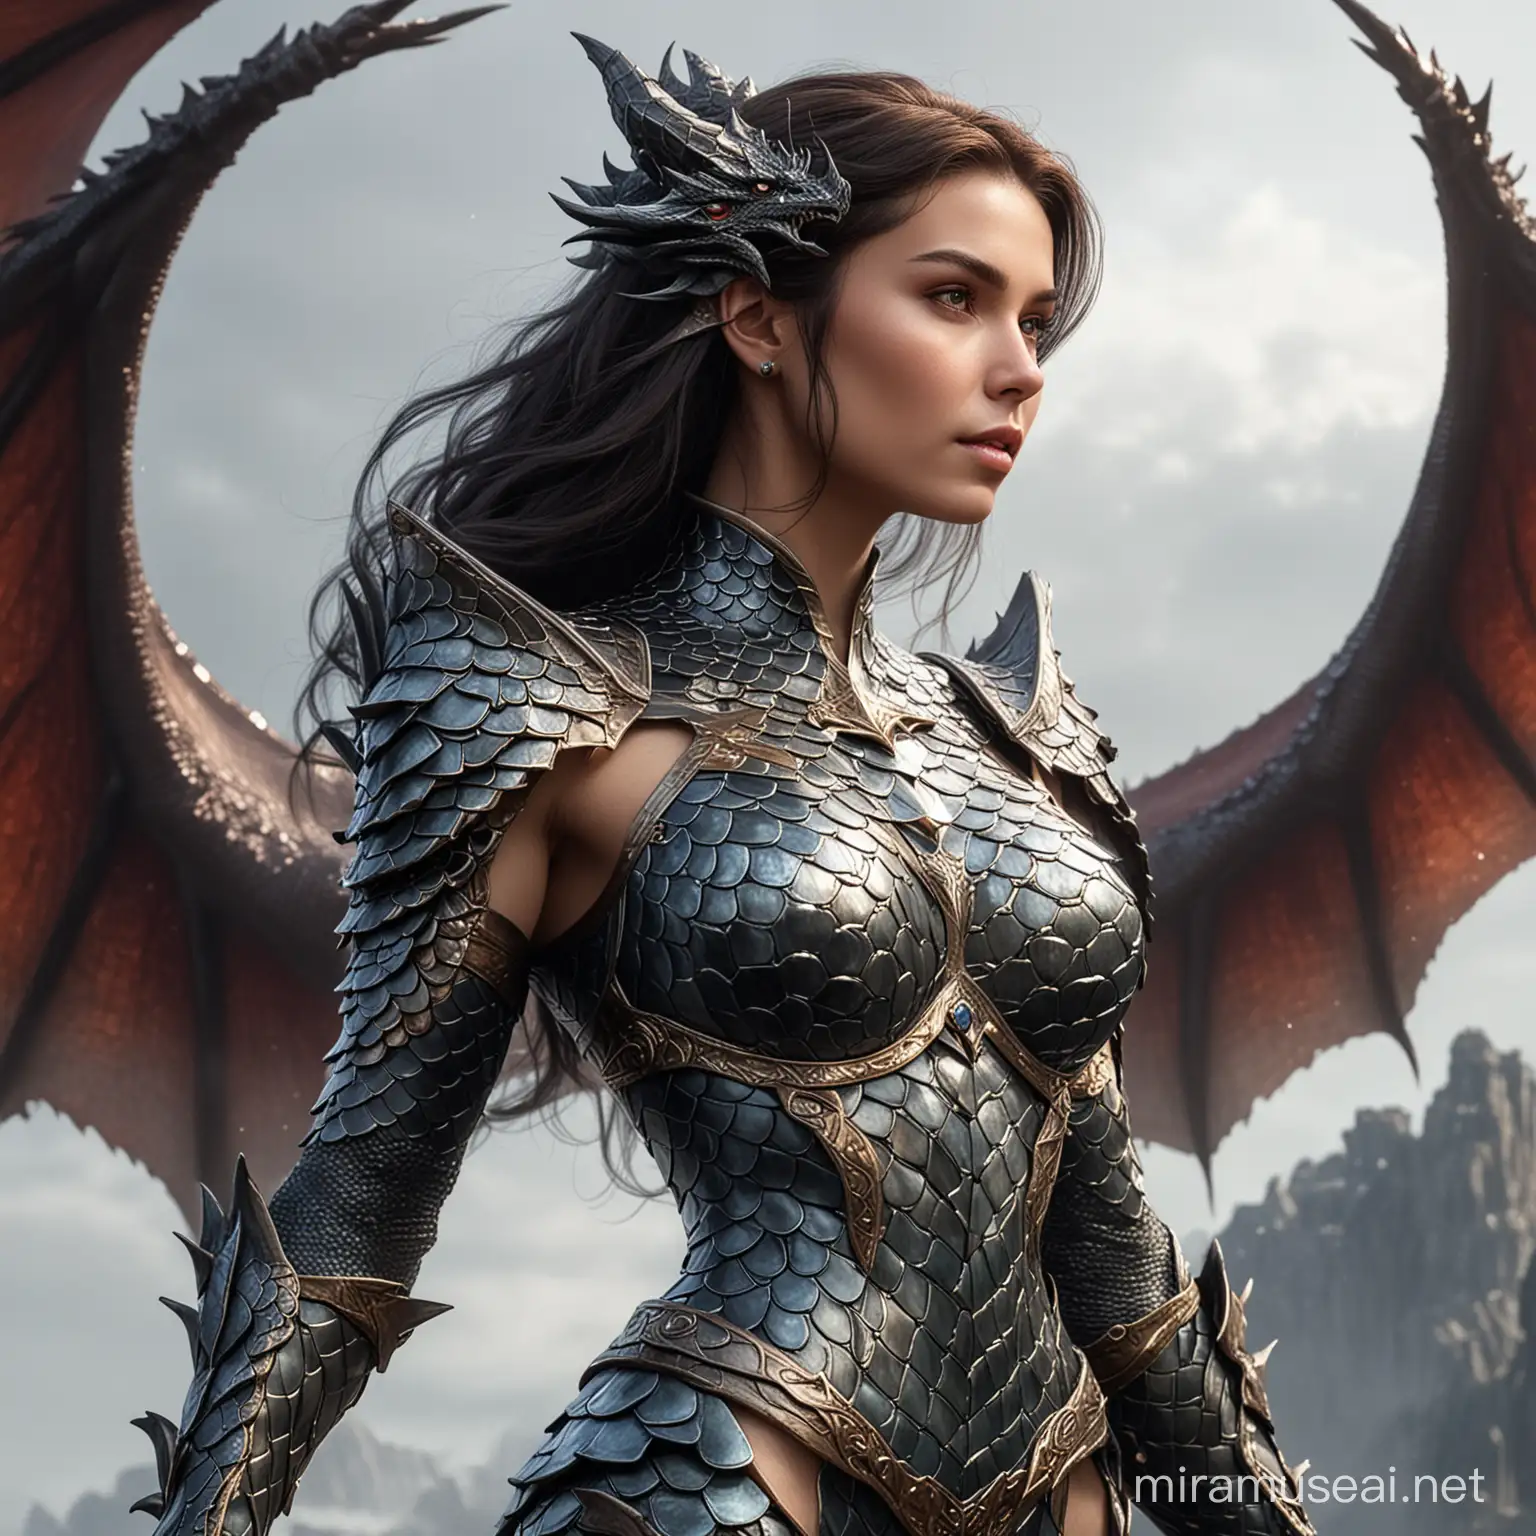 Fantasy Portrait of a Woman with Dragon Scale Armor